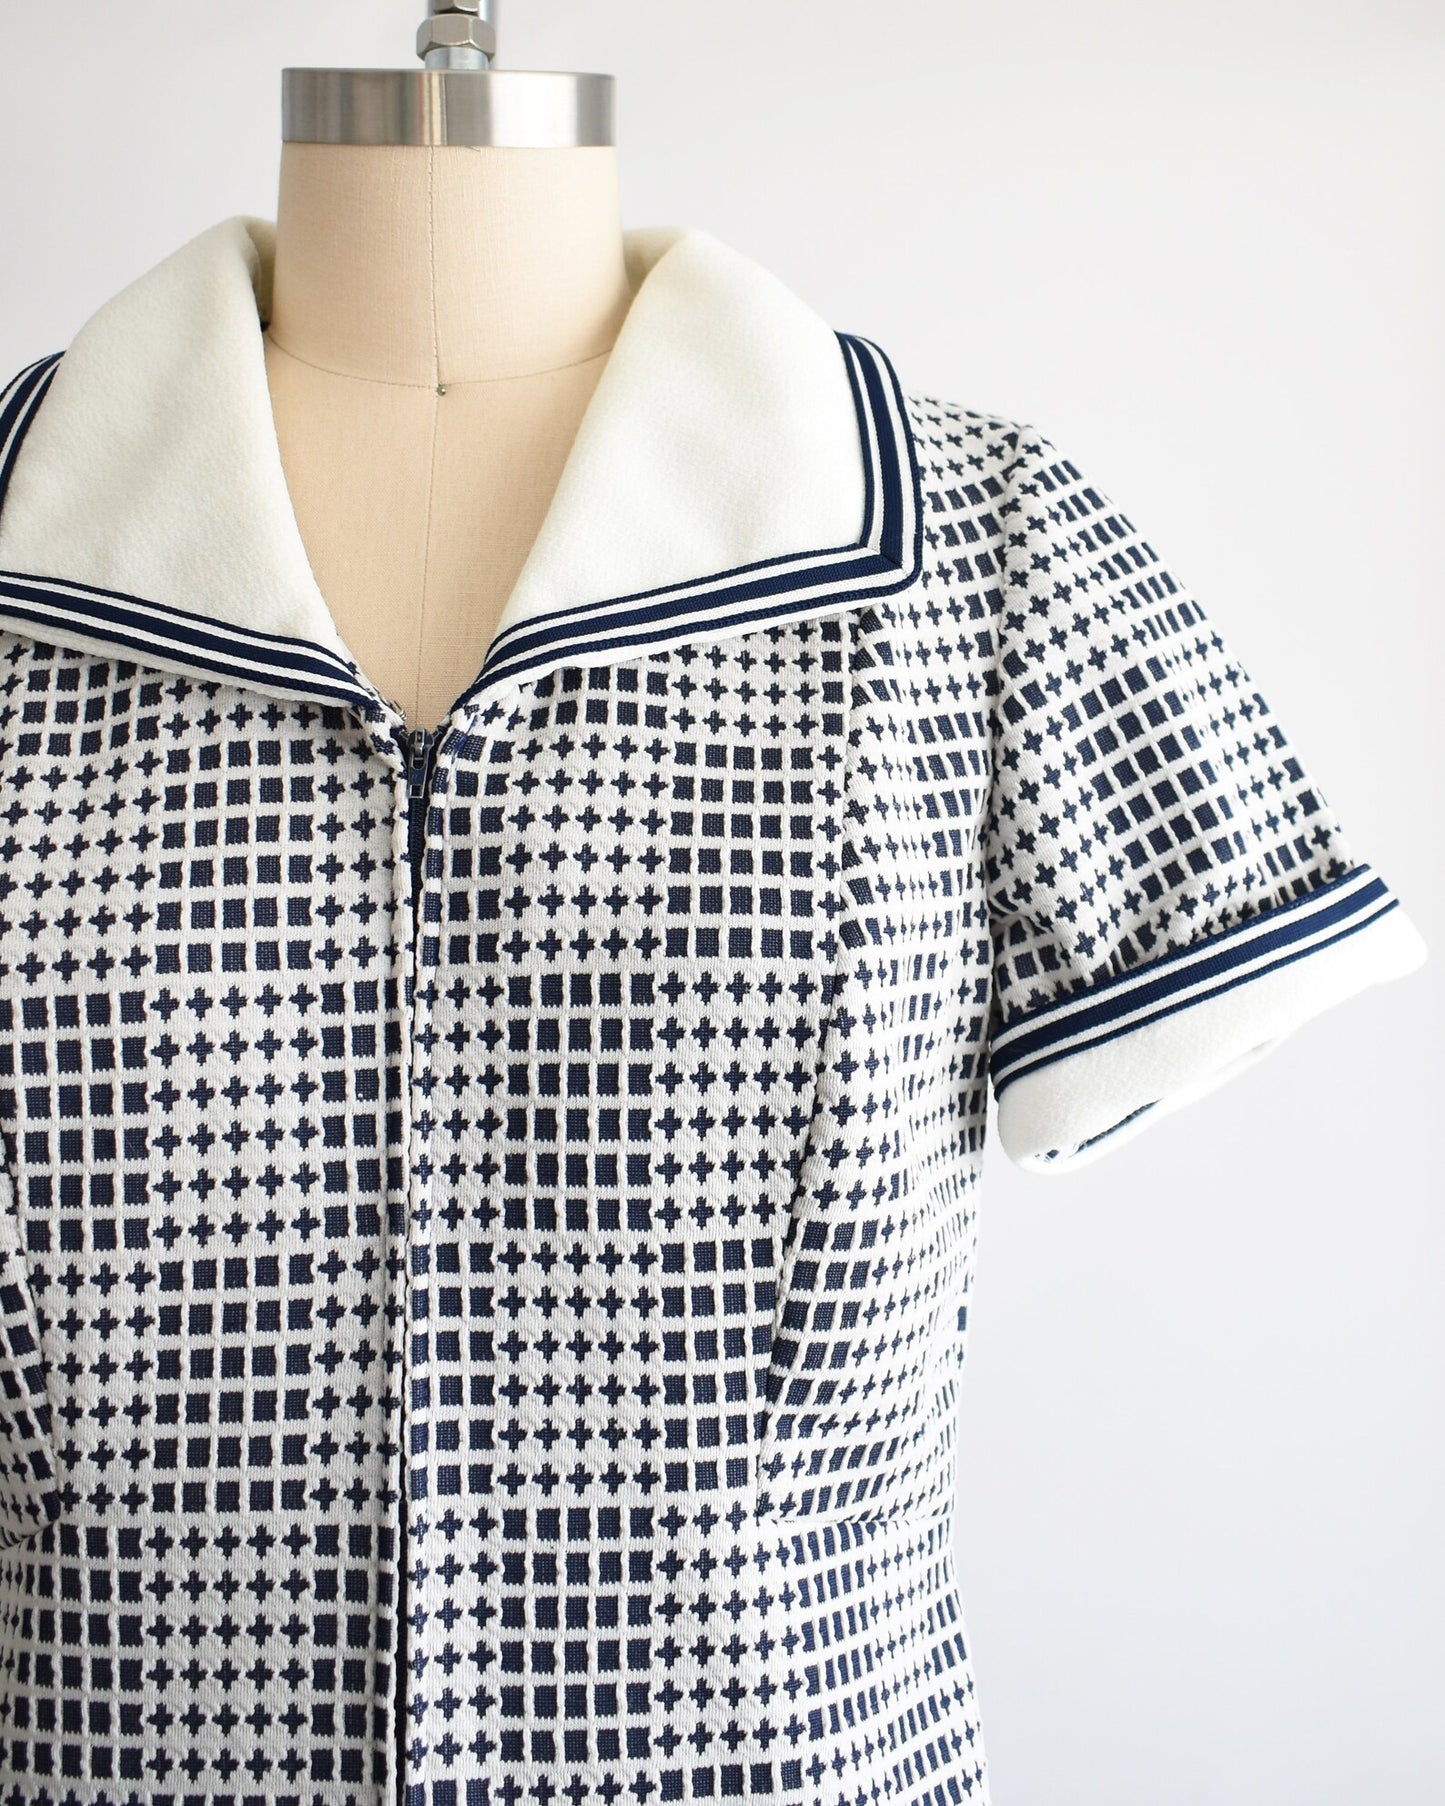 Side view of the bodice of the dress which shows the geometric print, collar, and short sleeves.